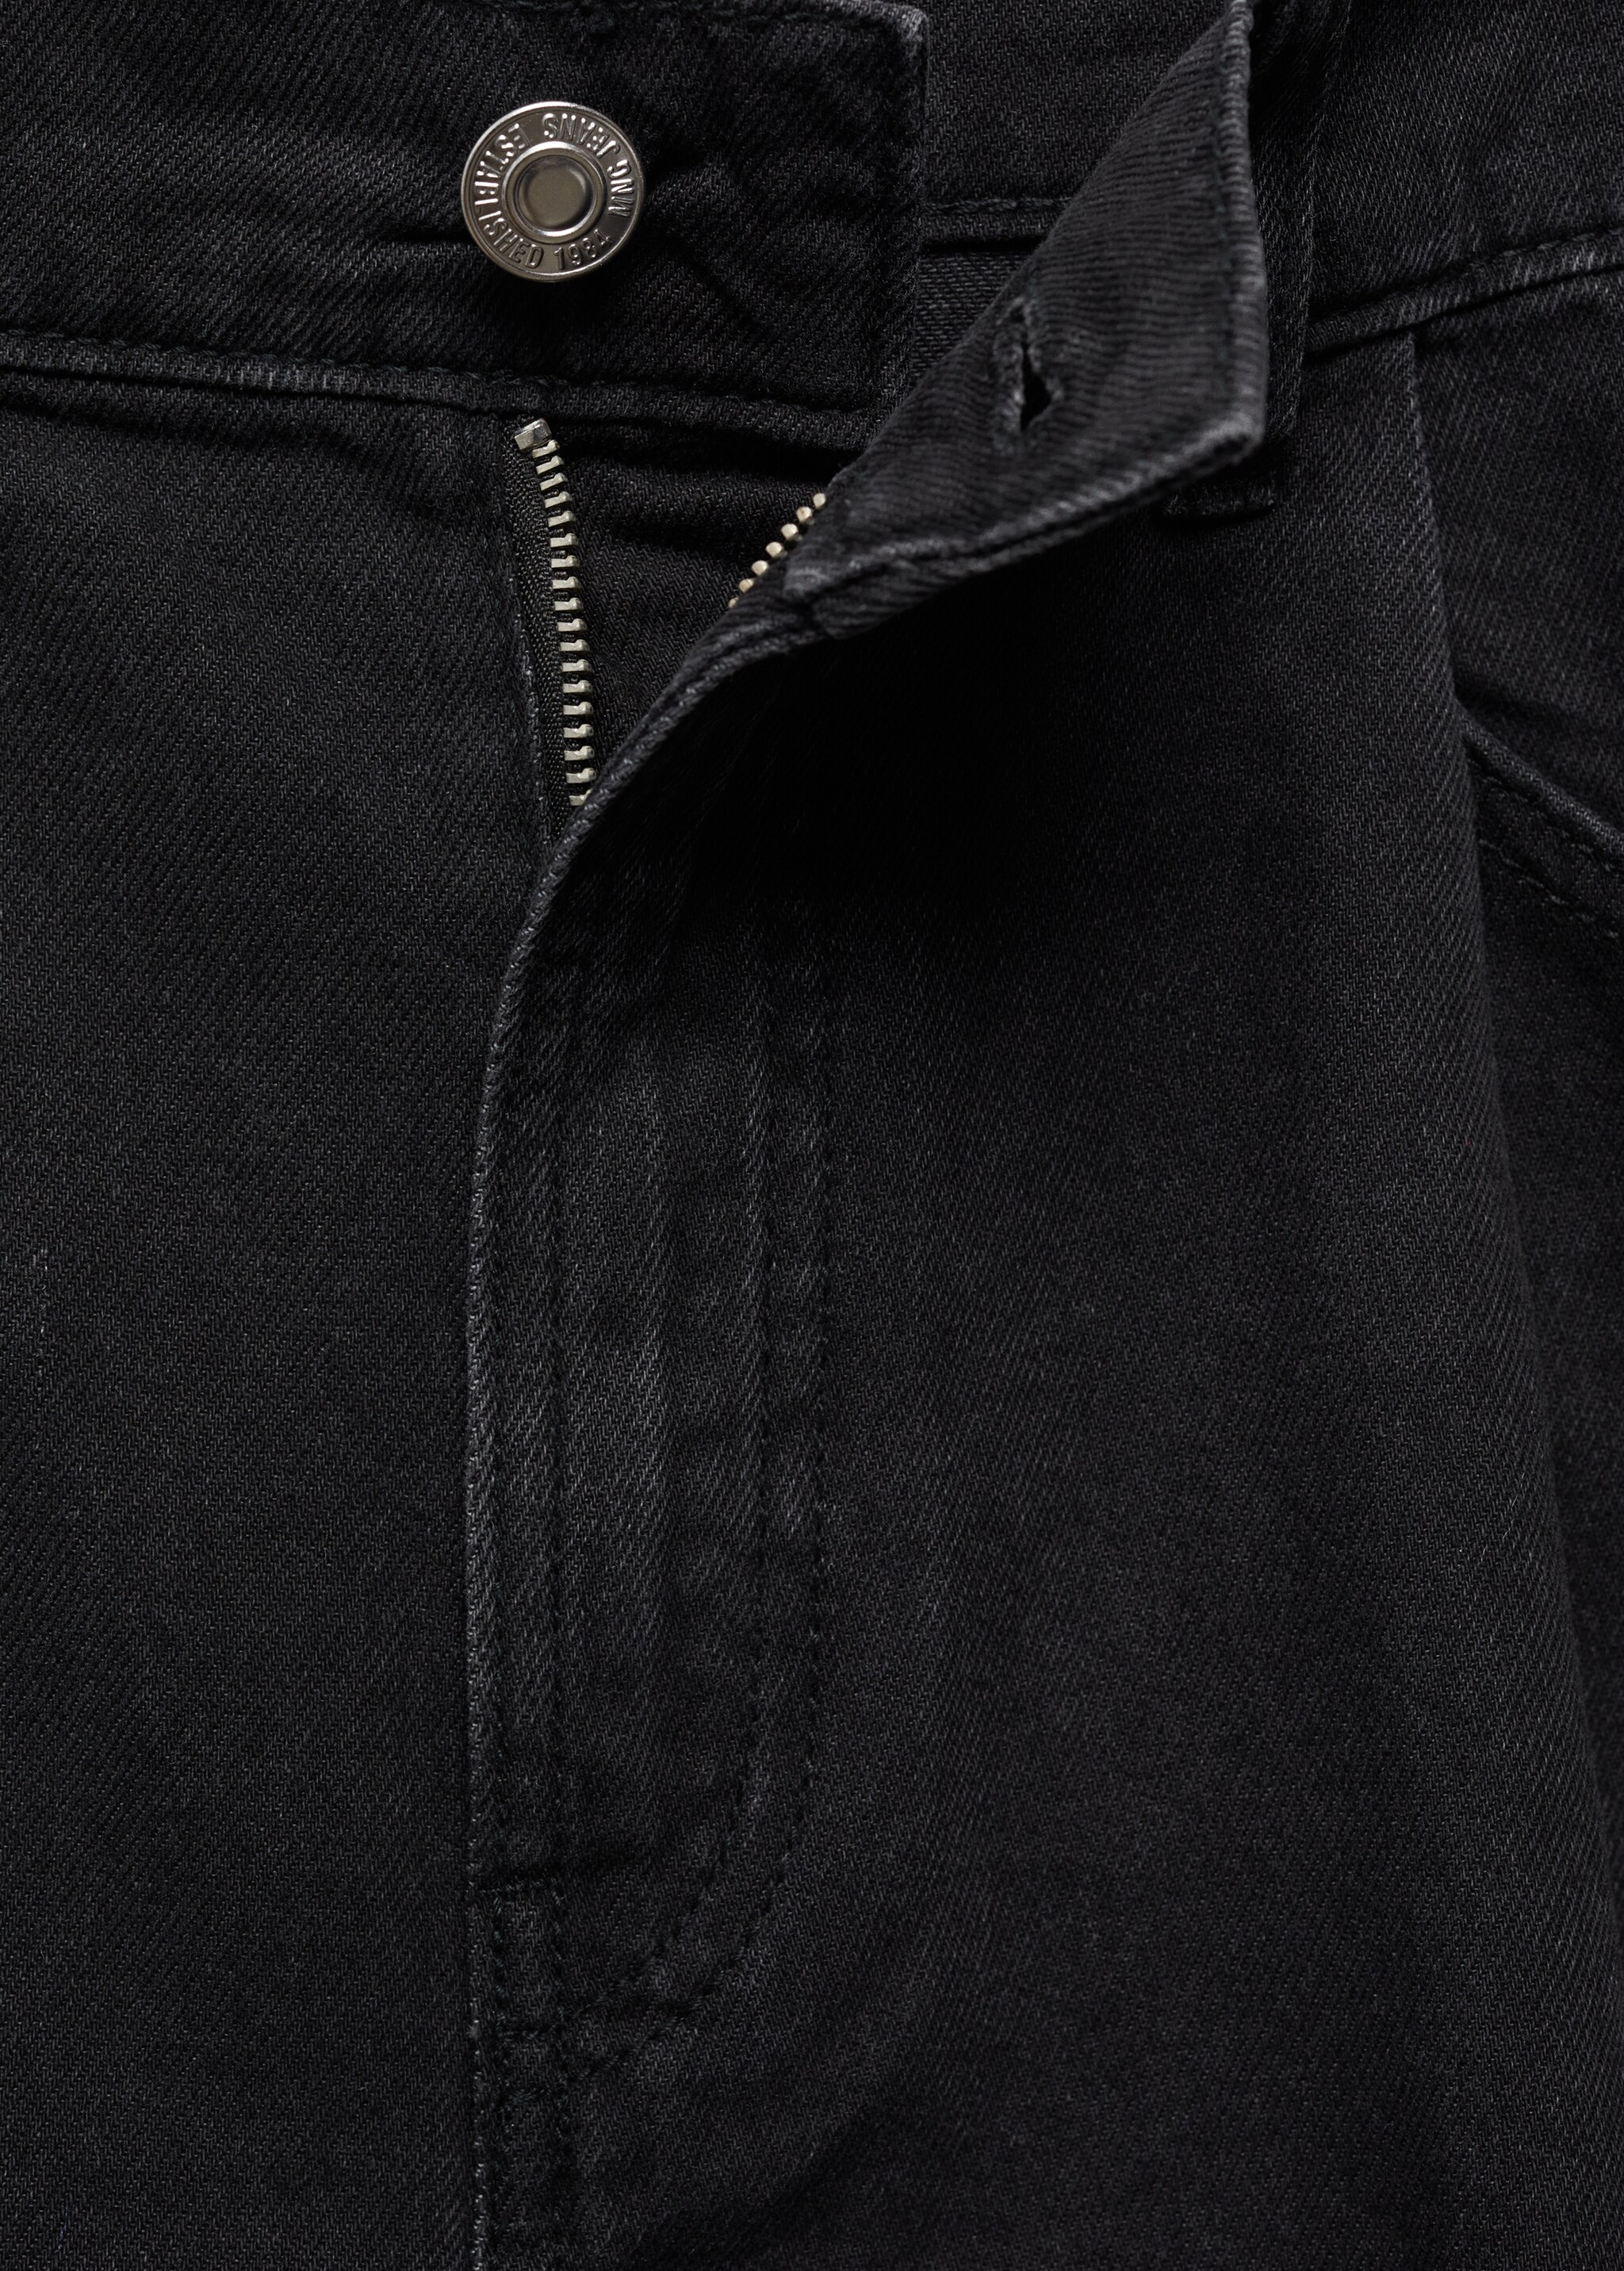 Denim shorts with pleats - Details of the article 8